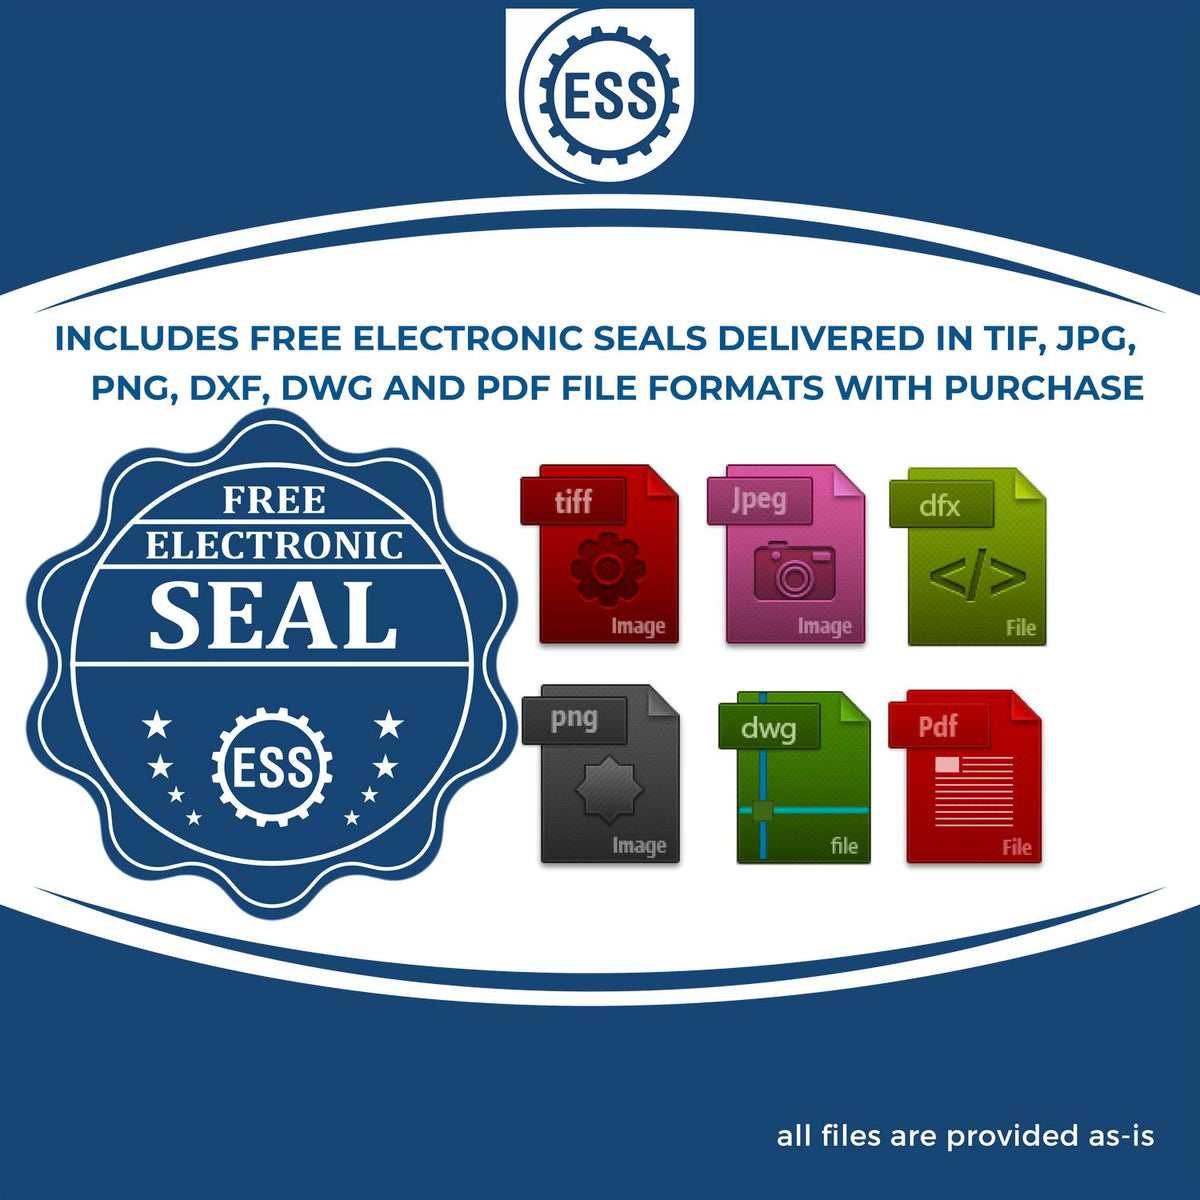 An infographic for the free electronic seal for the Heavy Duty Cast Iron Mississippi Architect Embosser illustrating the different file type icons such as DXF, DWG, TIF, JPG and PNG.